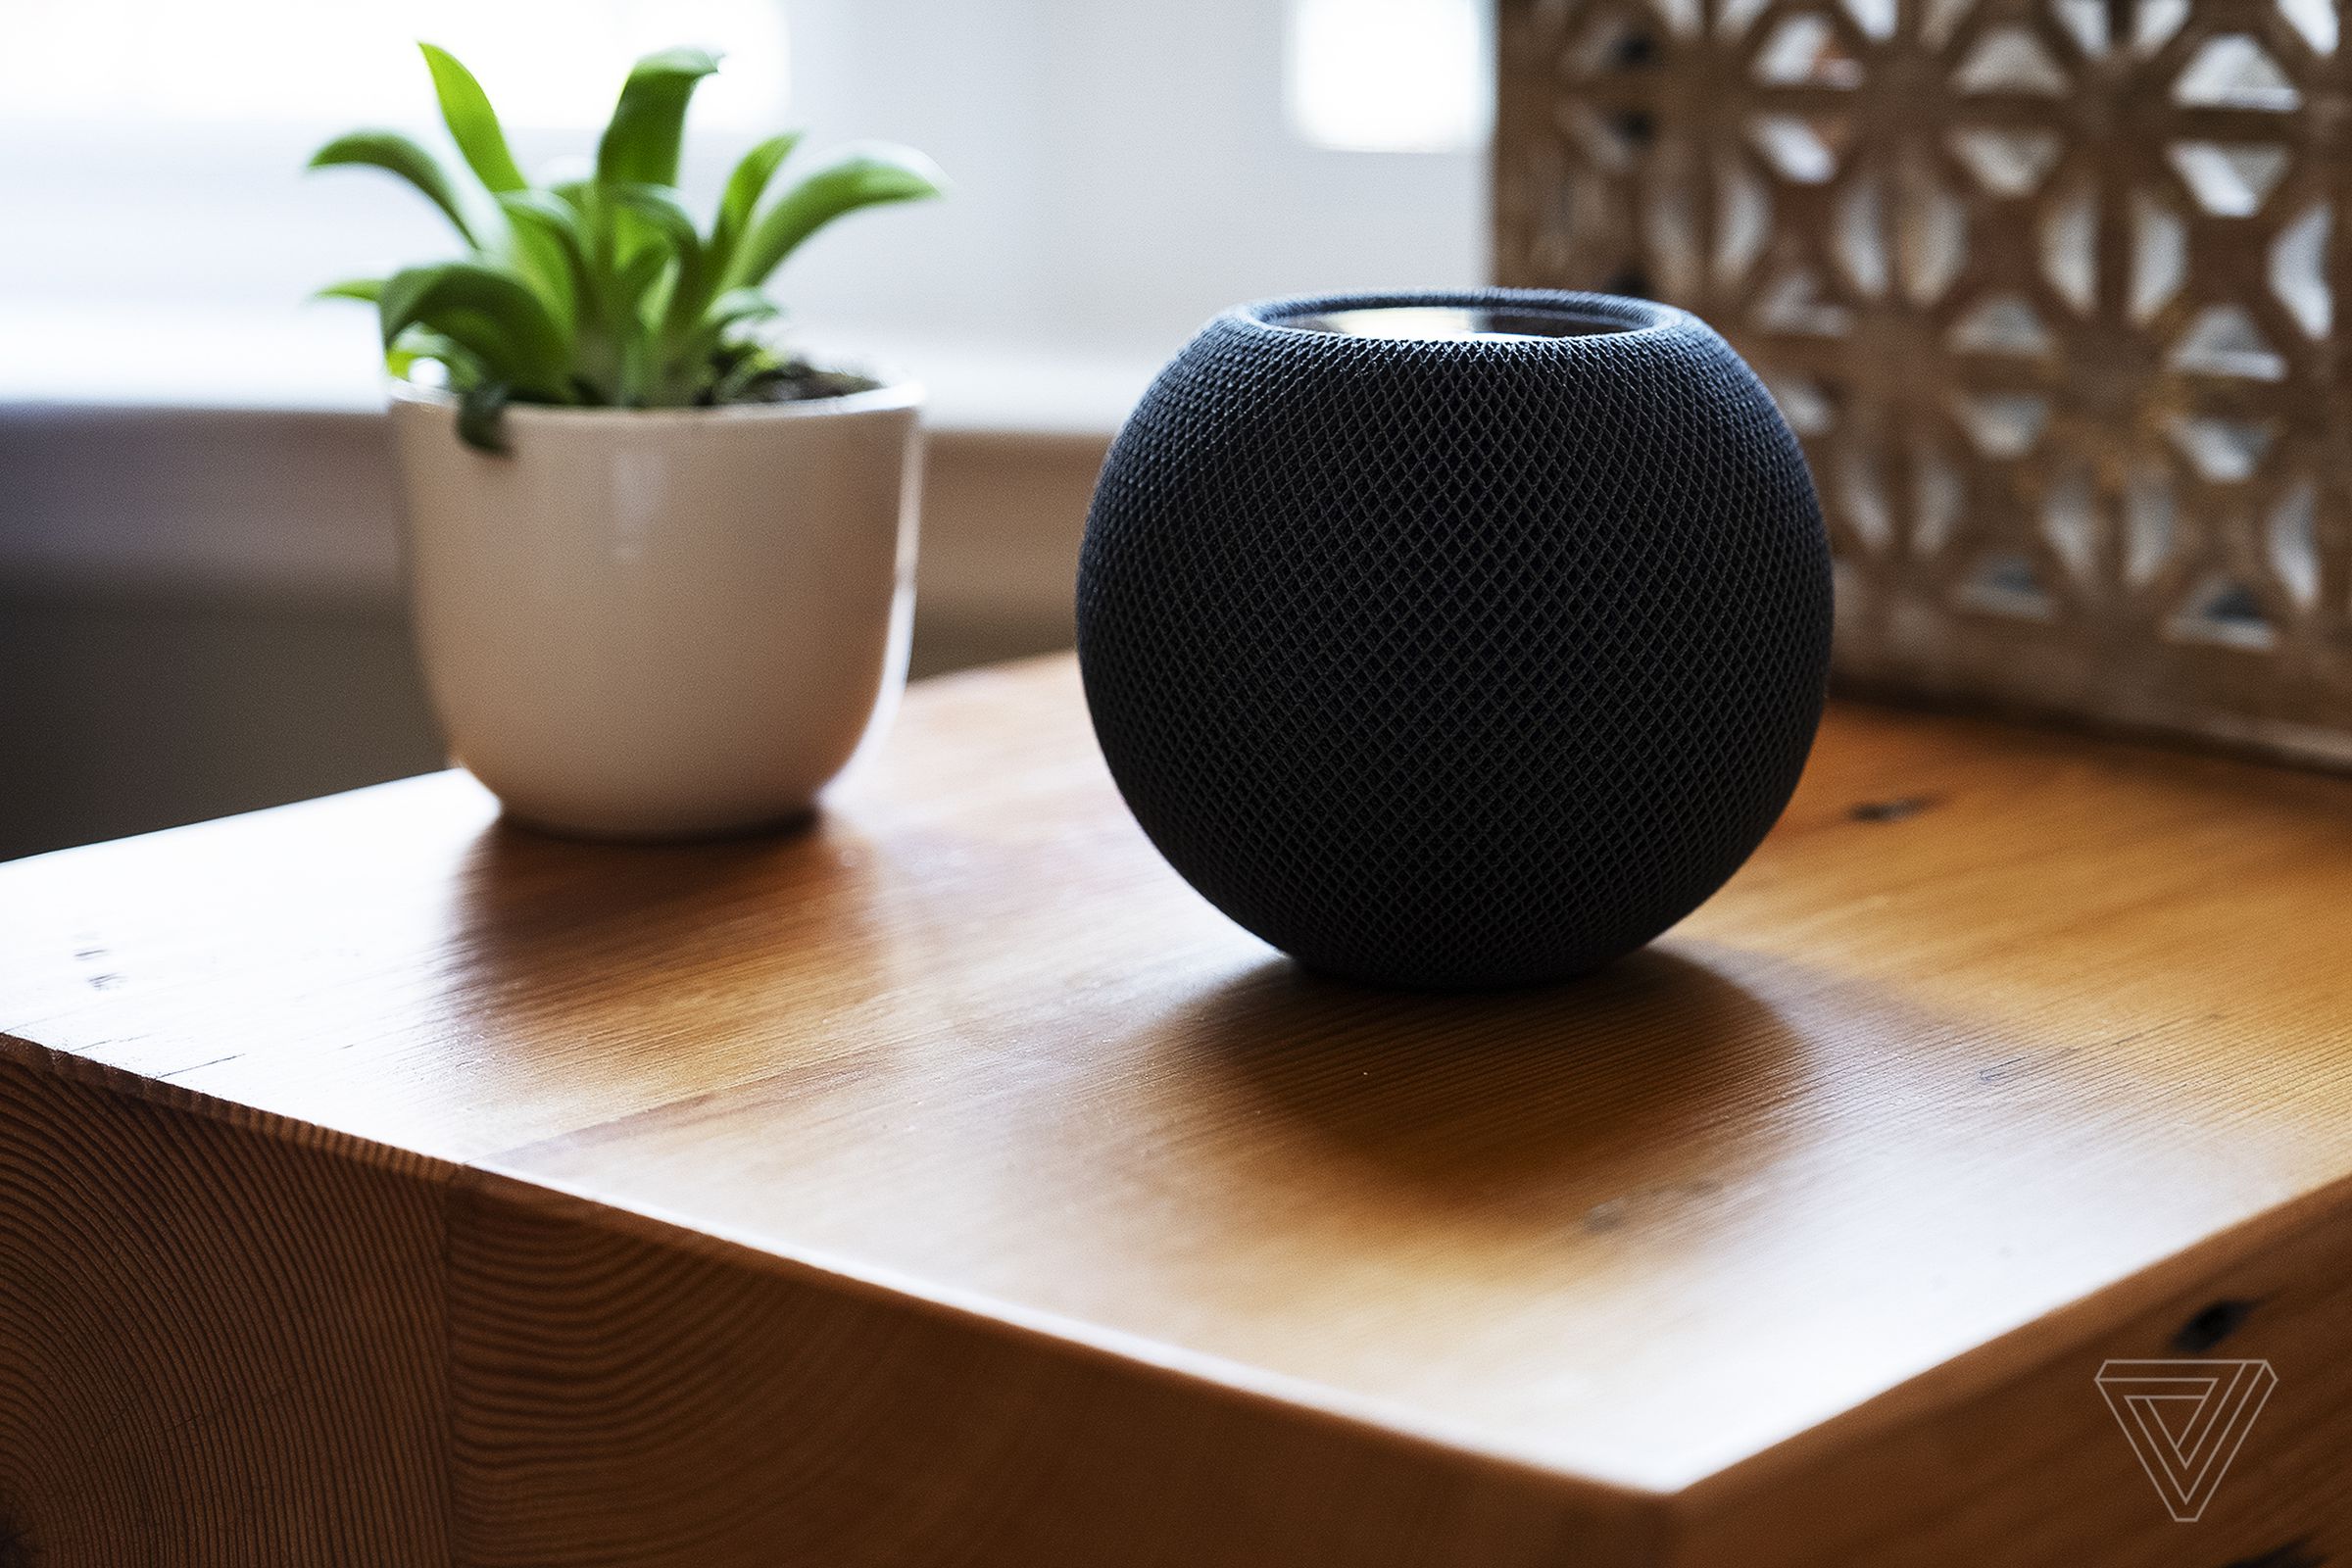 The HomePod mini is small enough to fit in most places in your home.